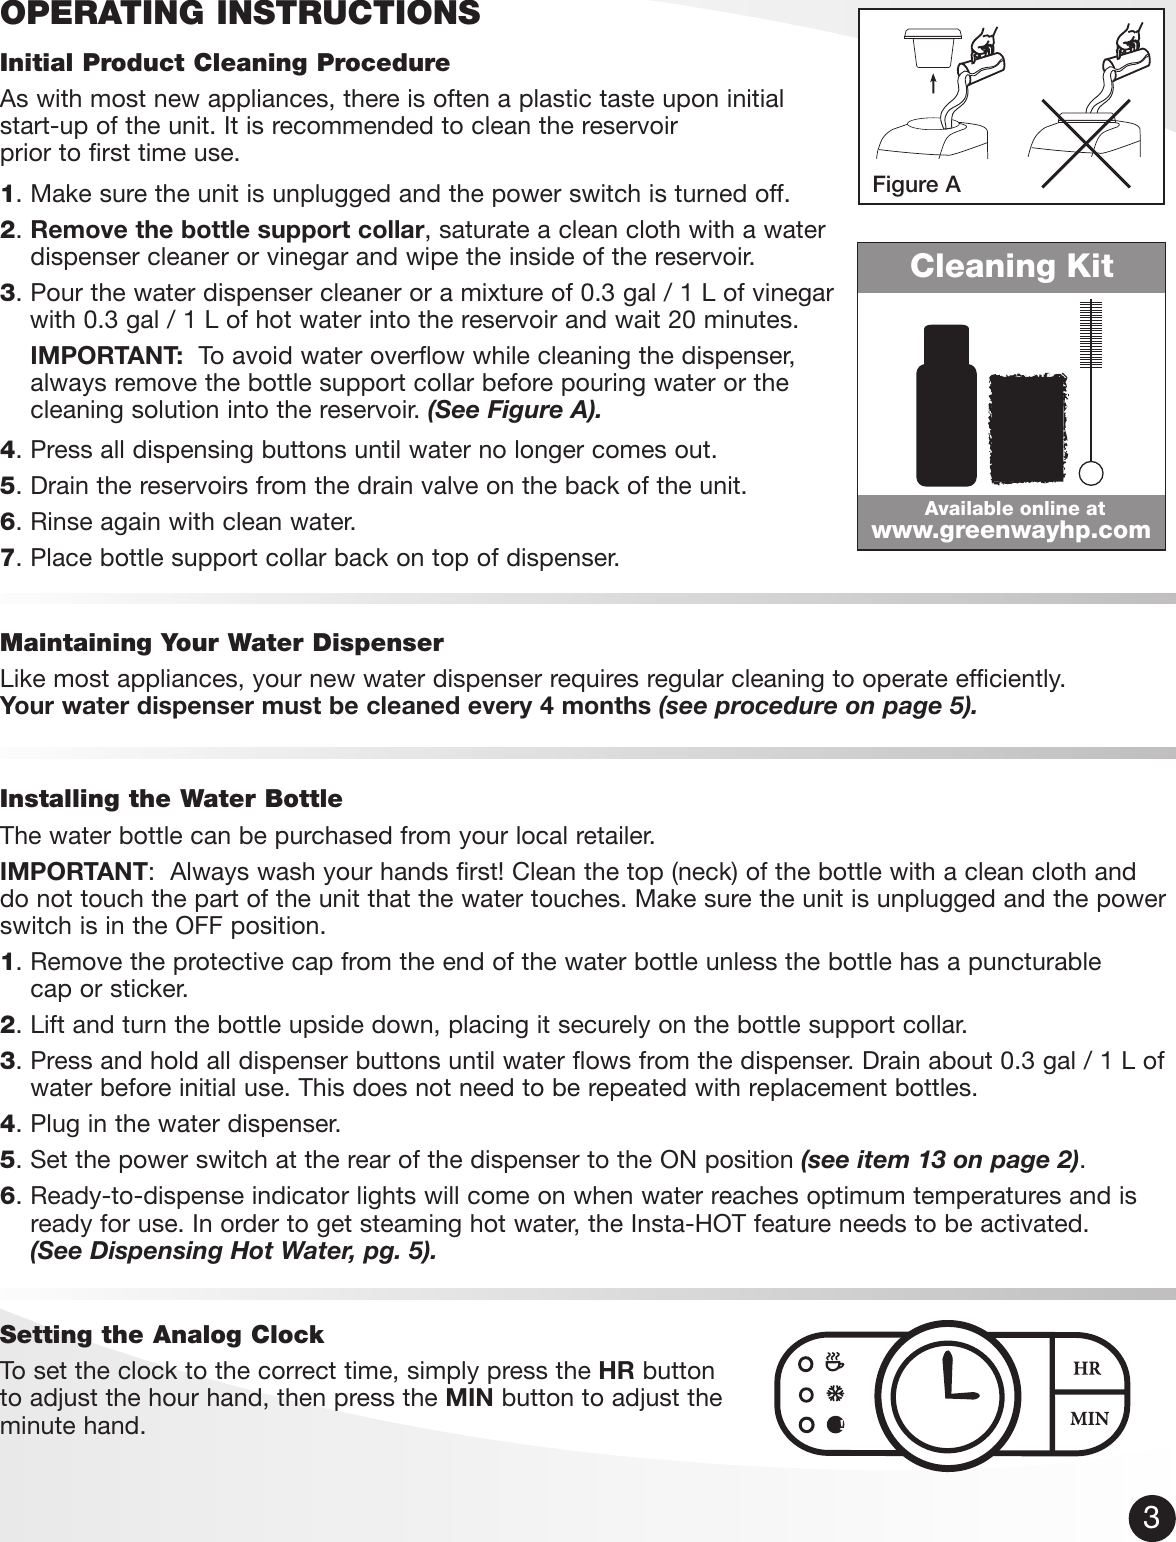 Page 4 of 10 - Vitapur Vitapur-Water-Dispenser-Use-And-Care-Manual- ManualsLib - Makes It Easy To Find Manuals Online!  Vitapur-water-dispenser-use-and-care-manual